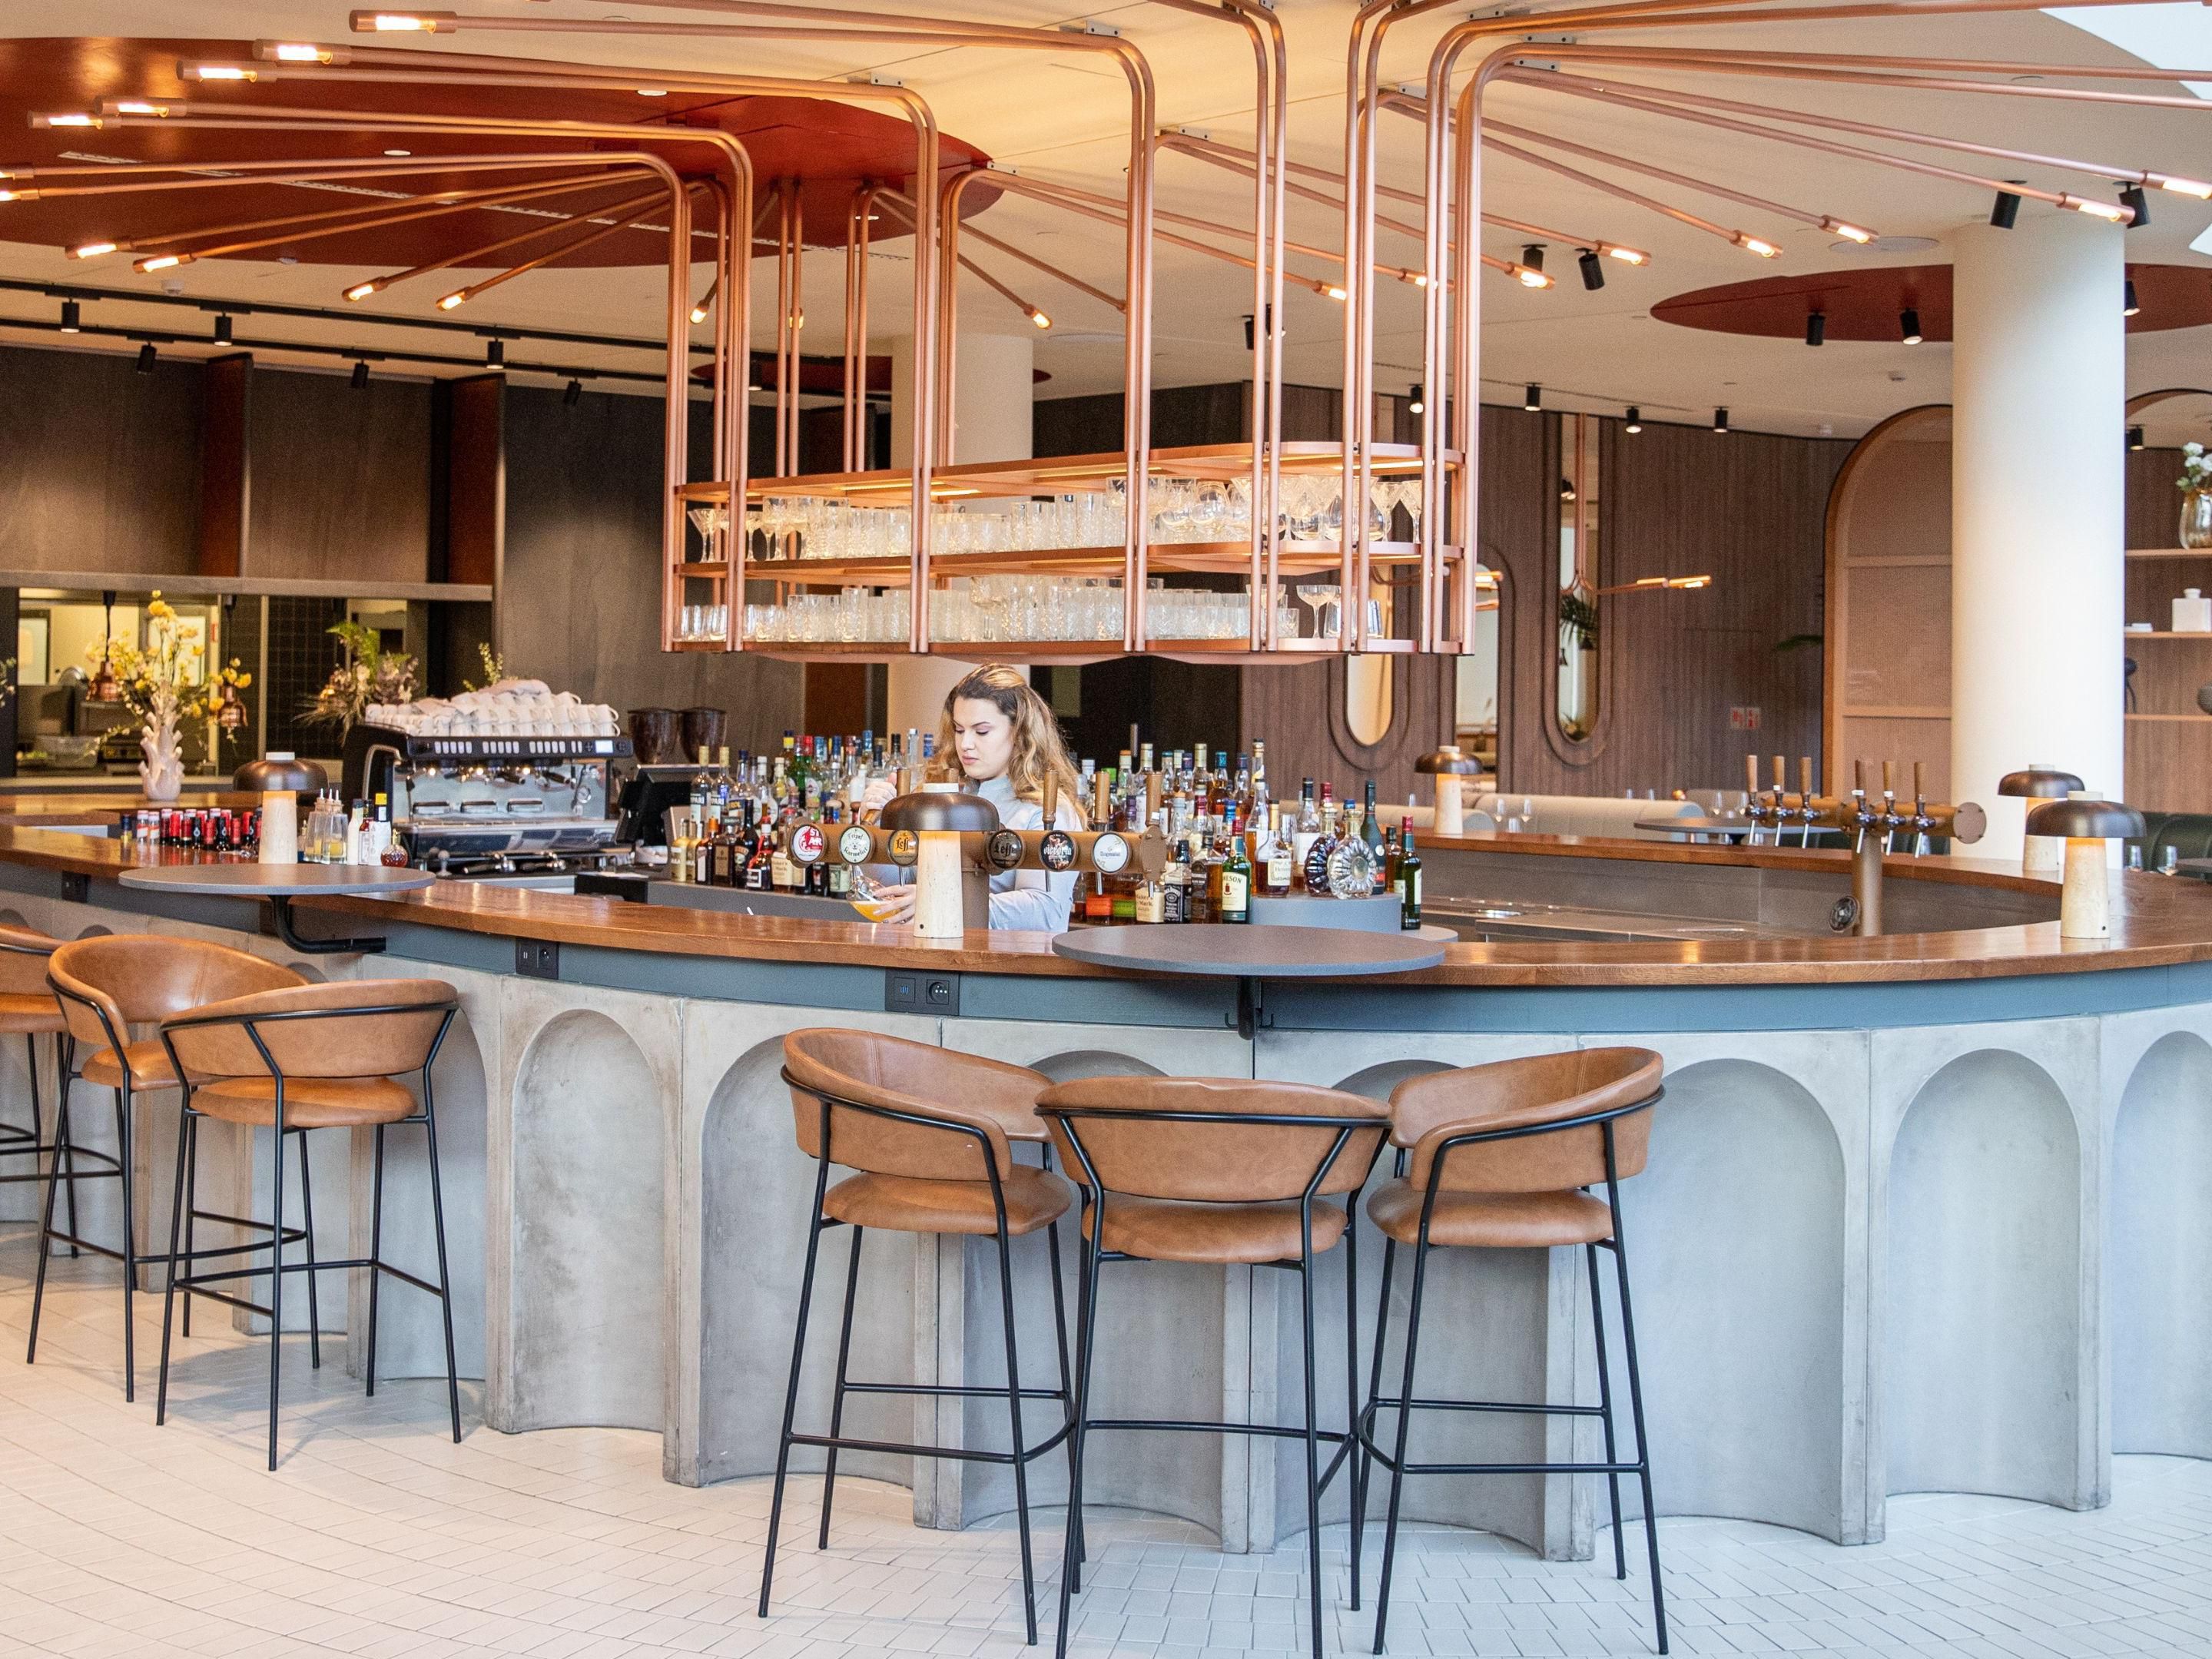 Our vibrant bar, Craft, serves Belgian food from locally sourced ingredients. Enjoy reimagined brasserie classics, from salads, sandwiches, and tapas to mains like monkfish stew and our Craft burger. Relax on the lakeside terrace while you sip a Belgian beer or an artisanal cocktail at our modern, lively bar.